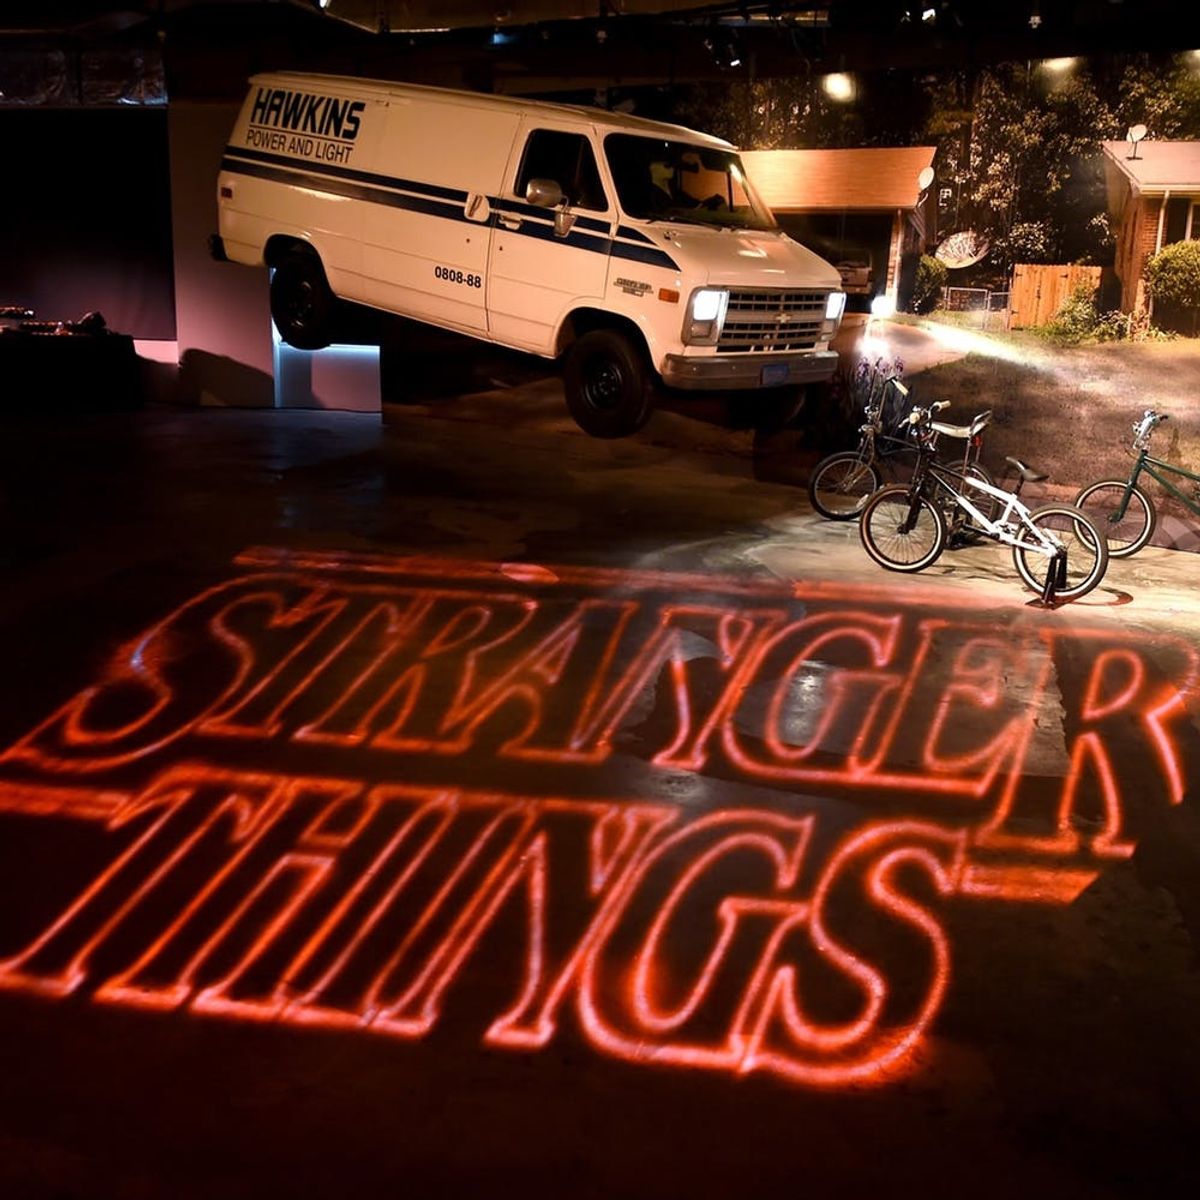 “Stranger Things” Season 3 Is Officially Happening!